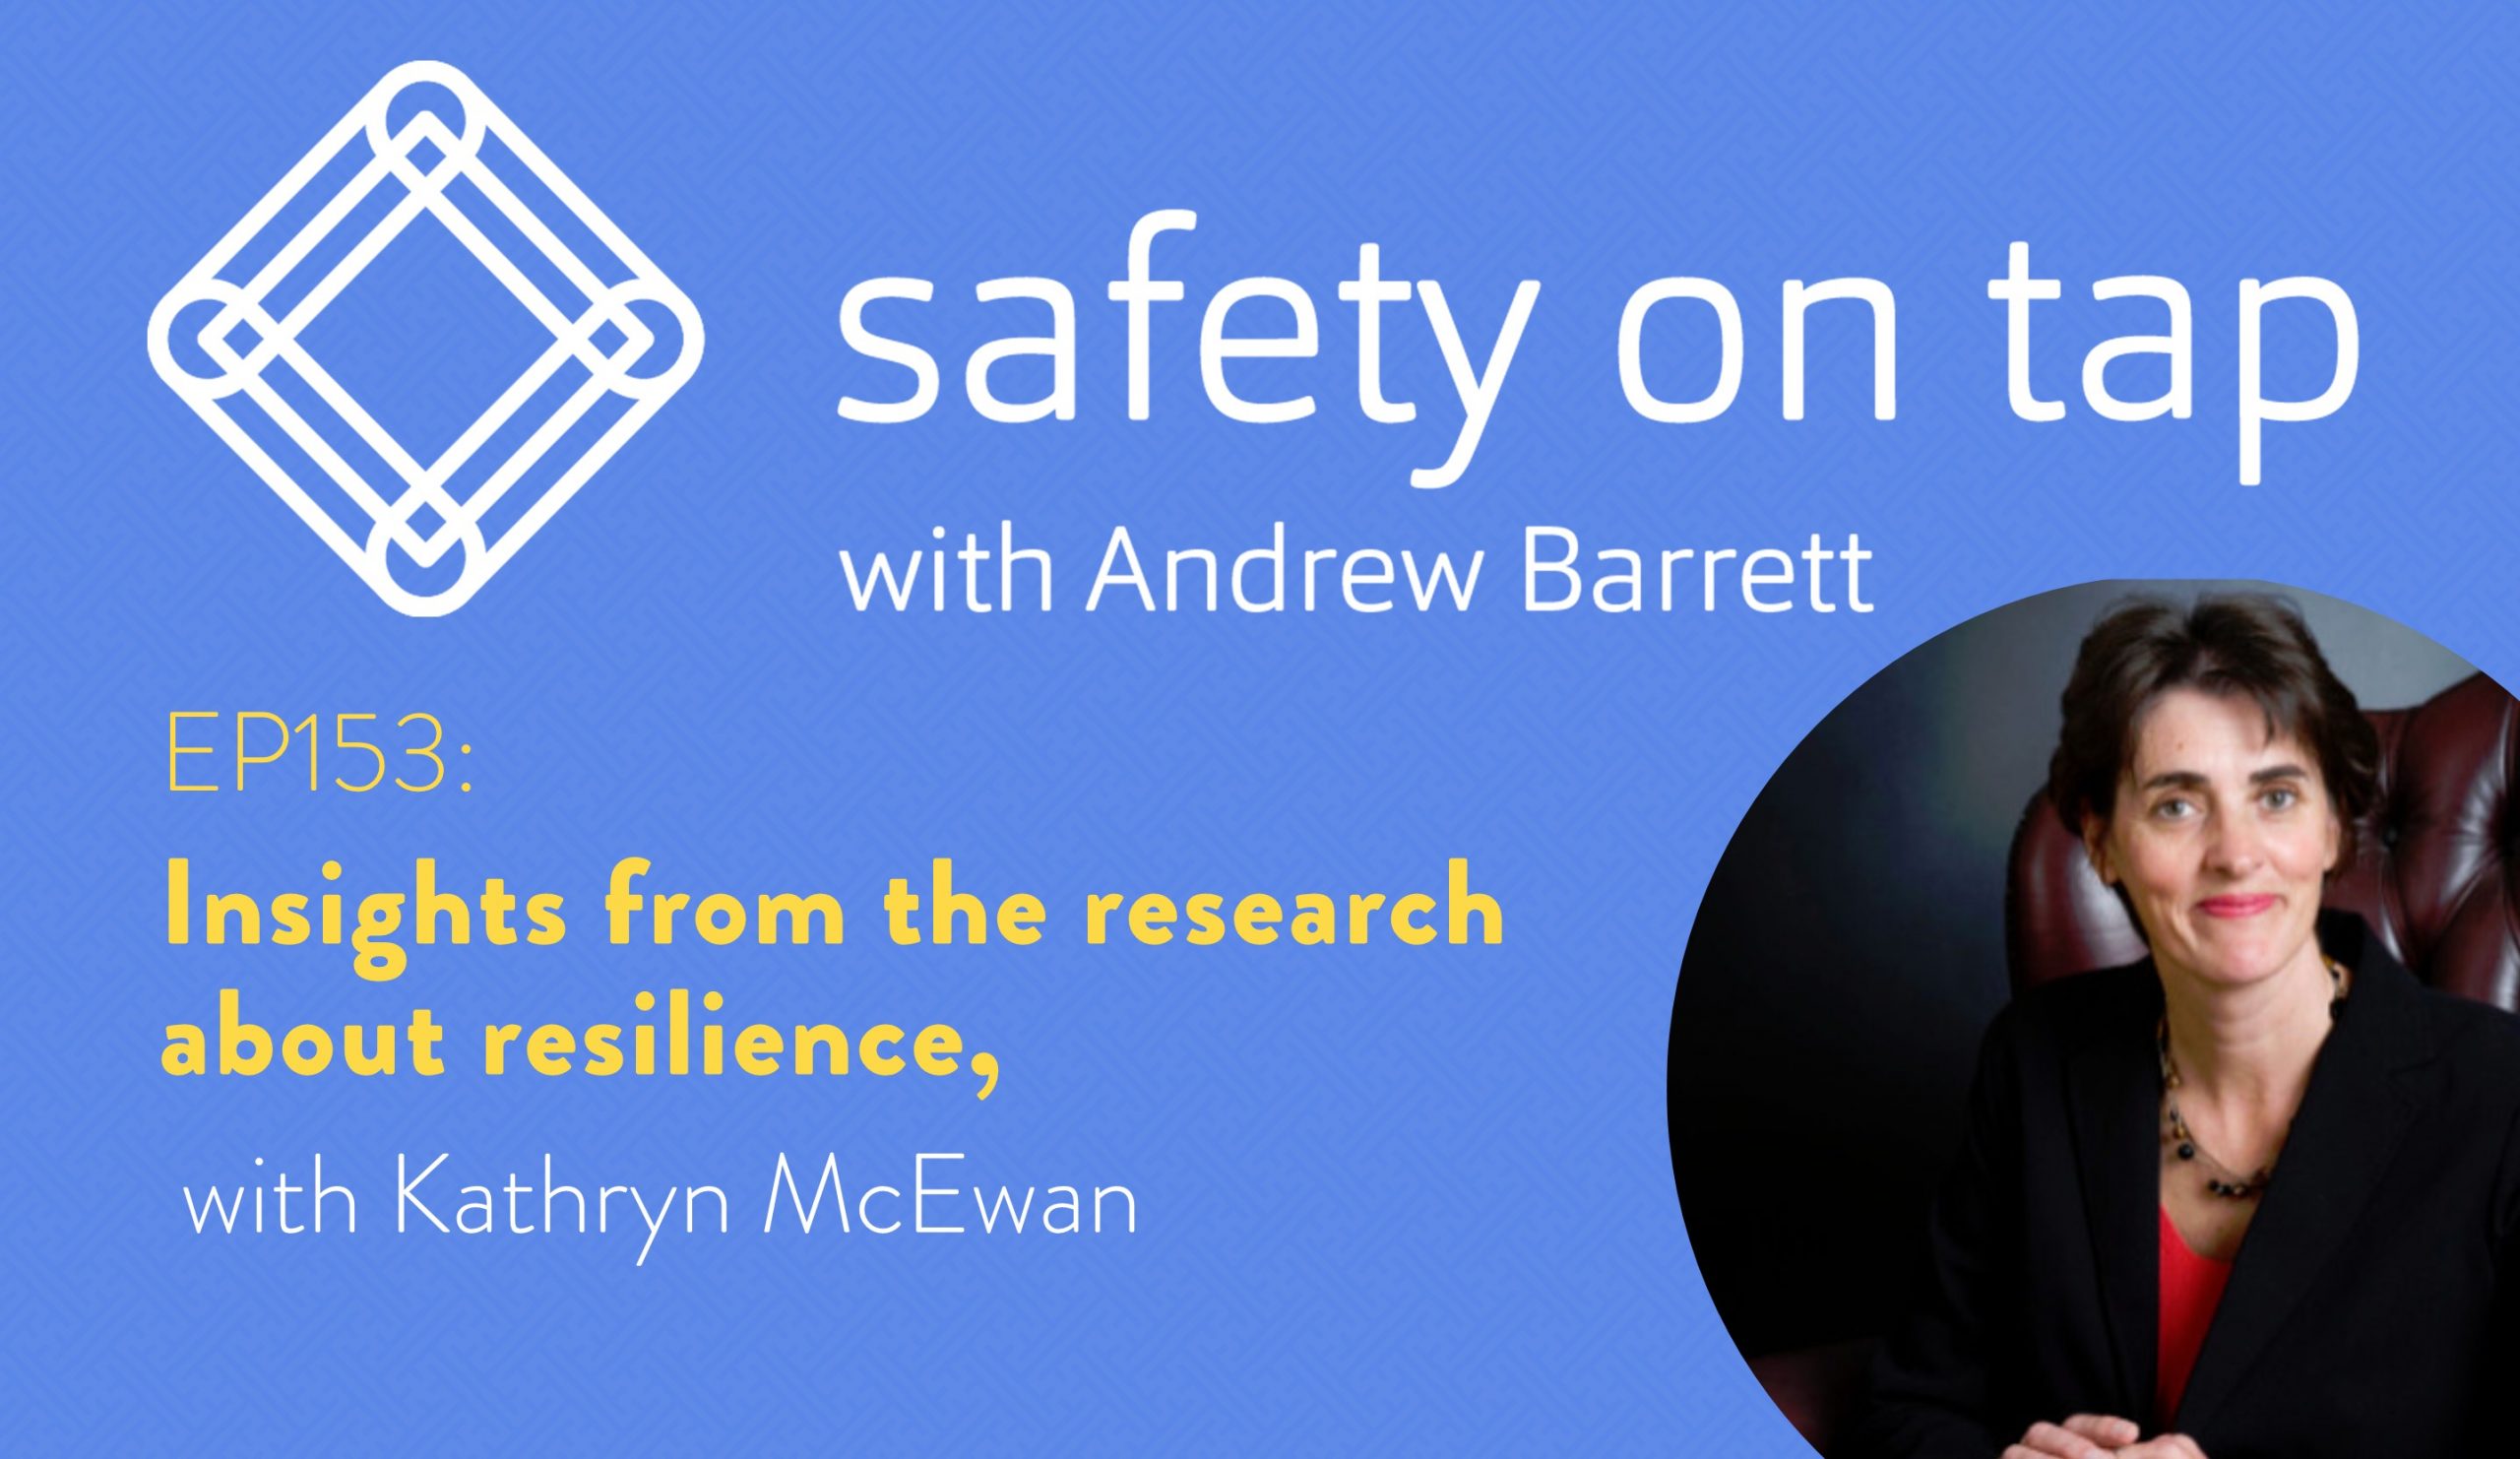 Ep153: Insights from the research about resilience, with Kathryn McEwan